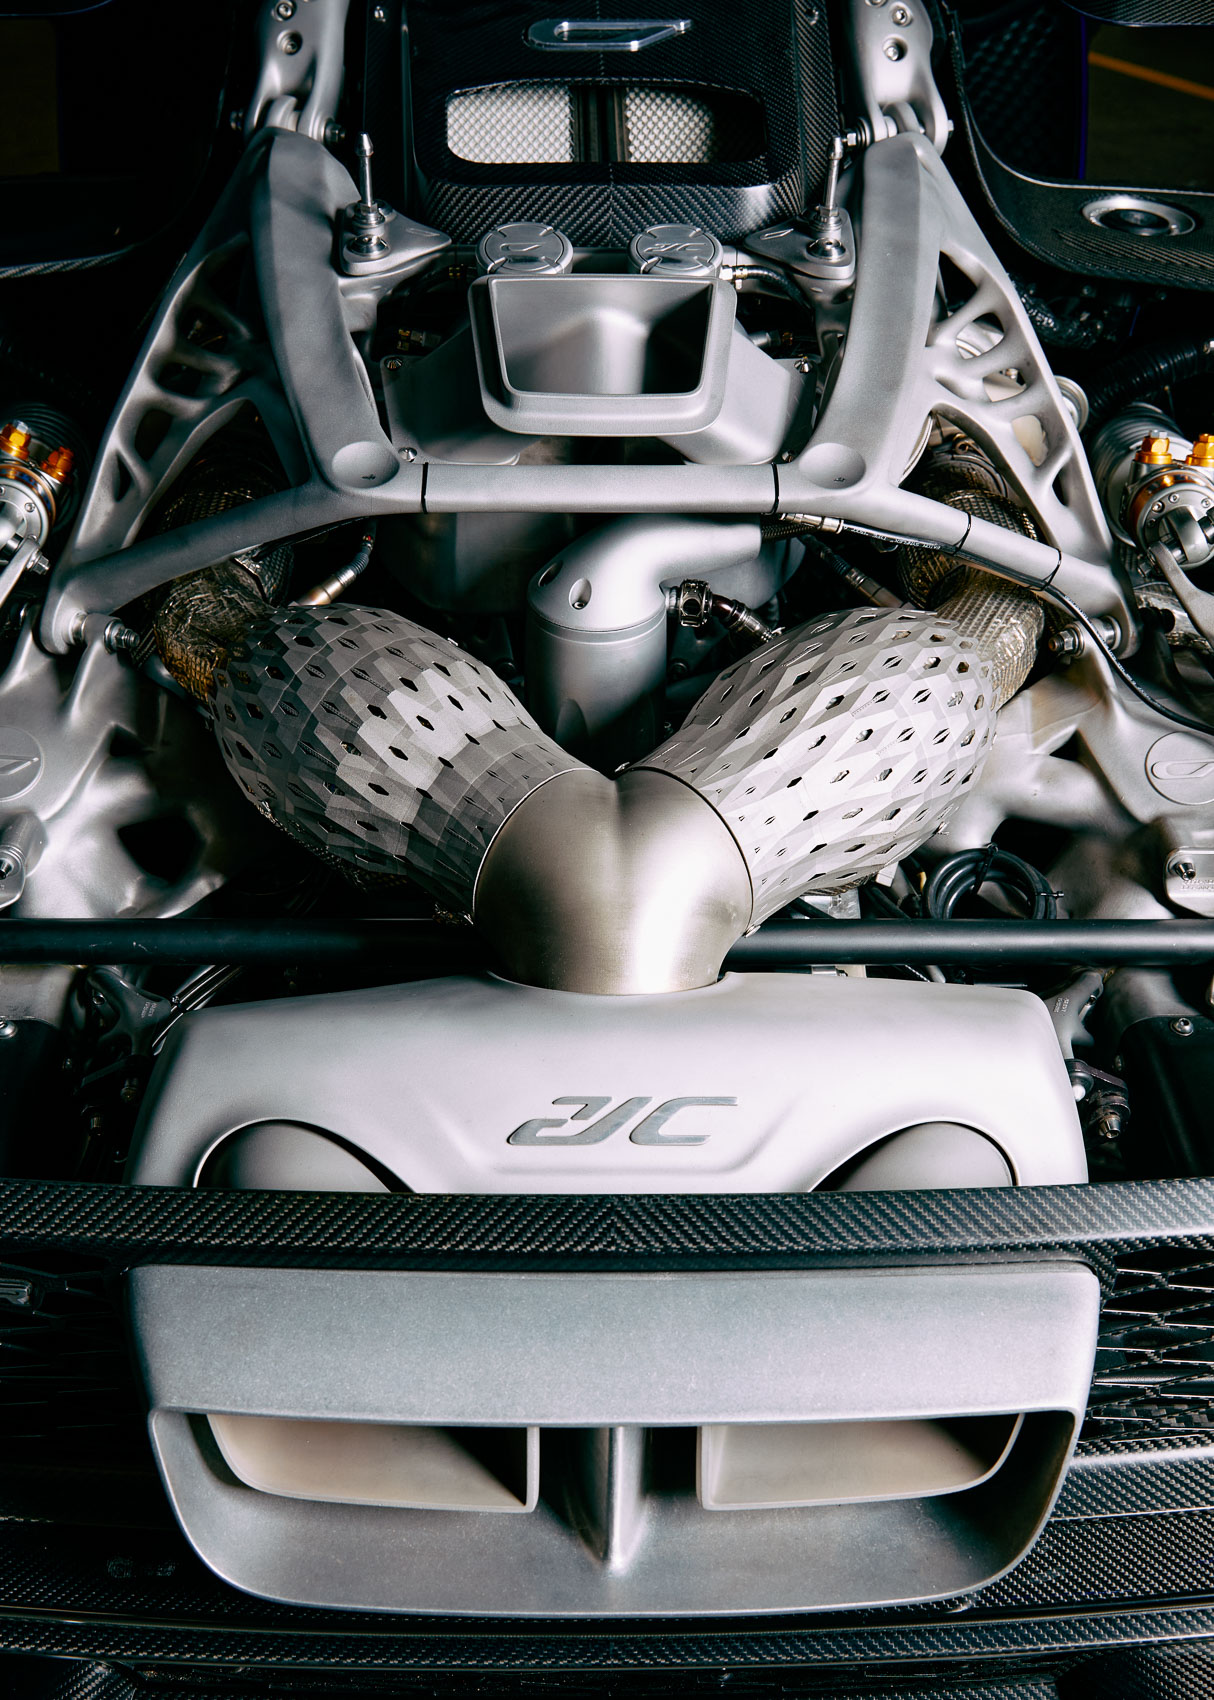 3D printed engine of of the 21C Hypercar | Los Angeles | Editorial and Commercial Photographer Patrick Strattner